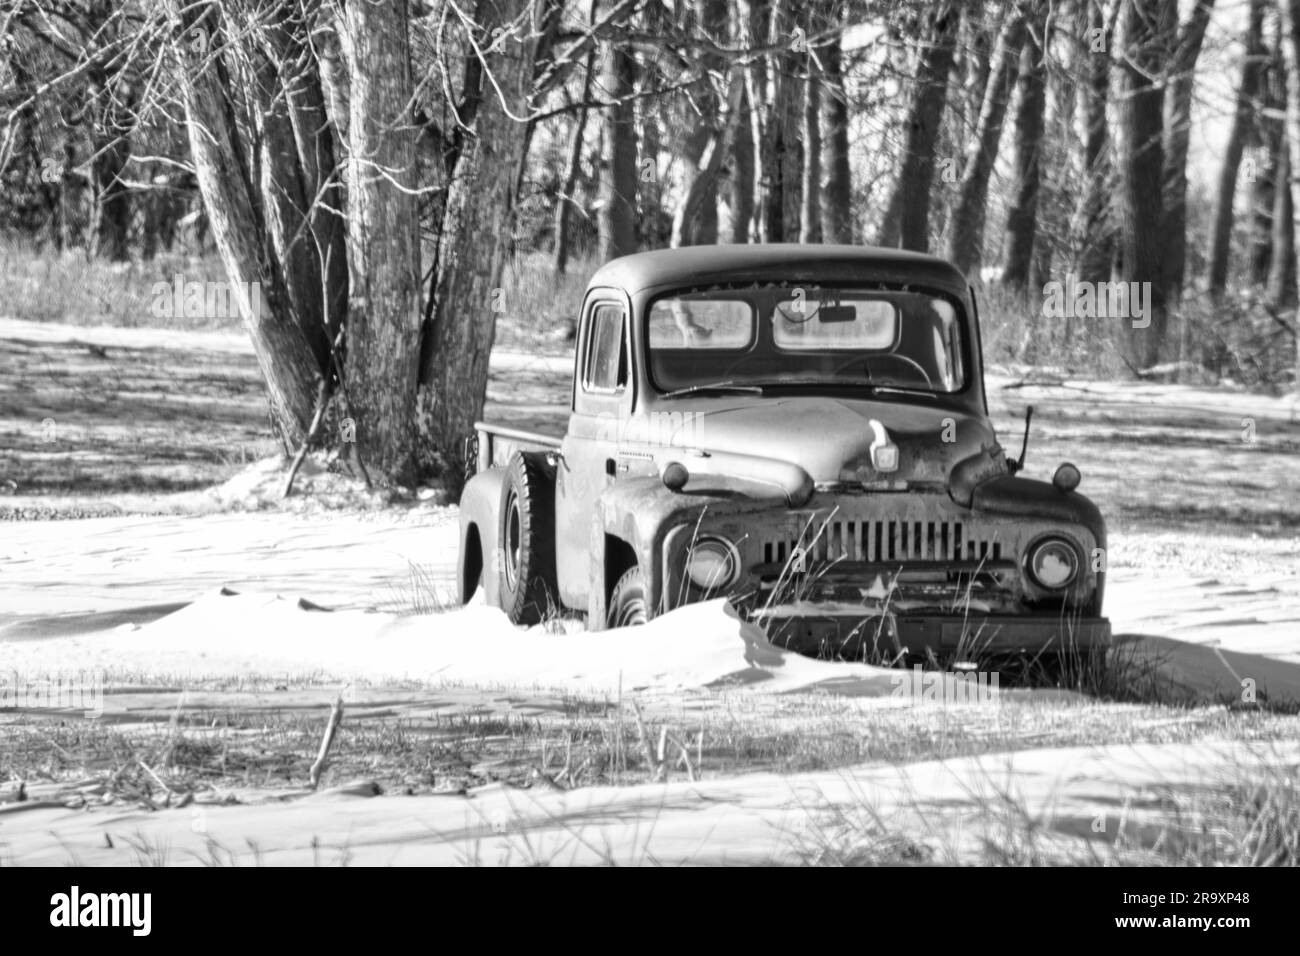 An old pickup truck sitting next to a tree in the snow Stock Photo